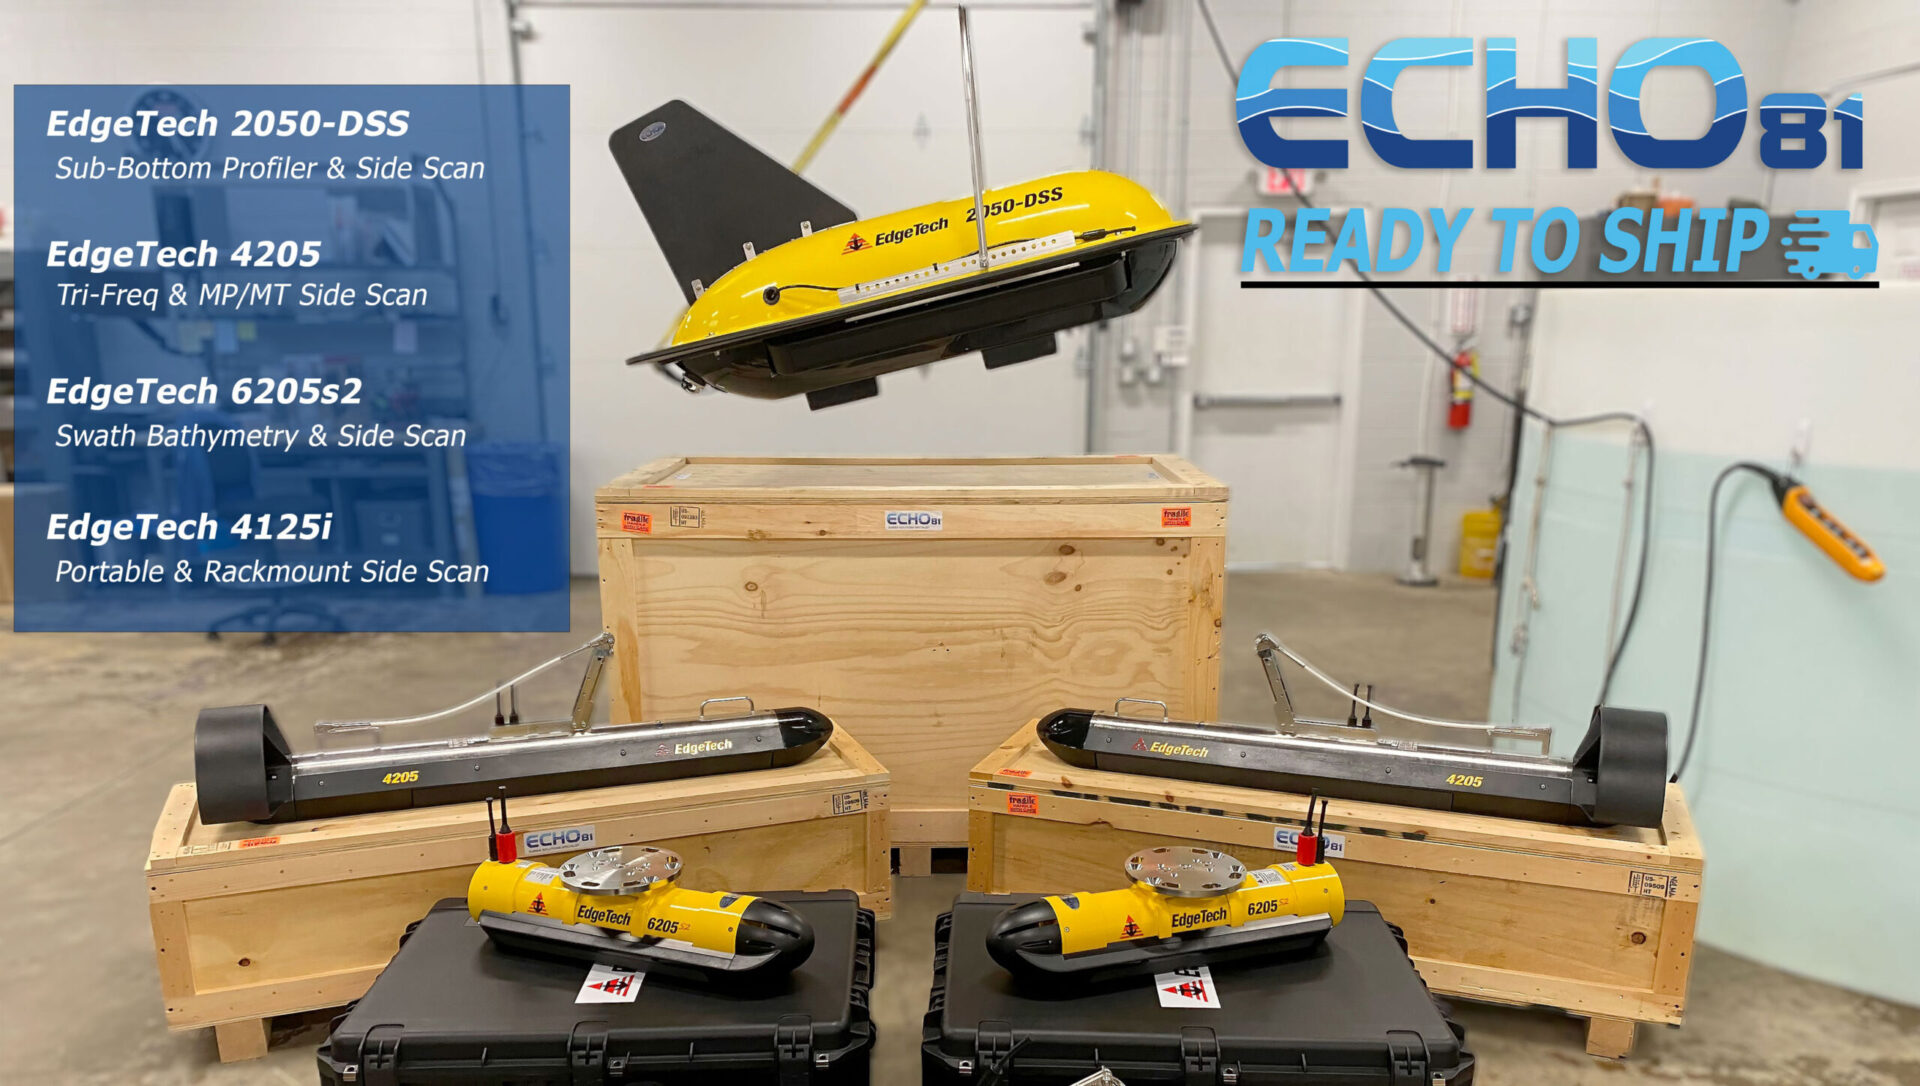 New Sales Stock ready to ship ECHO81 is Premier Supplier of Underwater Survey Technologies Rental Sales Training Offshore Hydrography Geophysics.